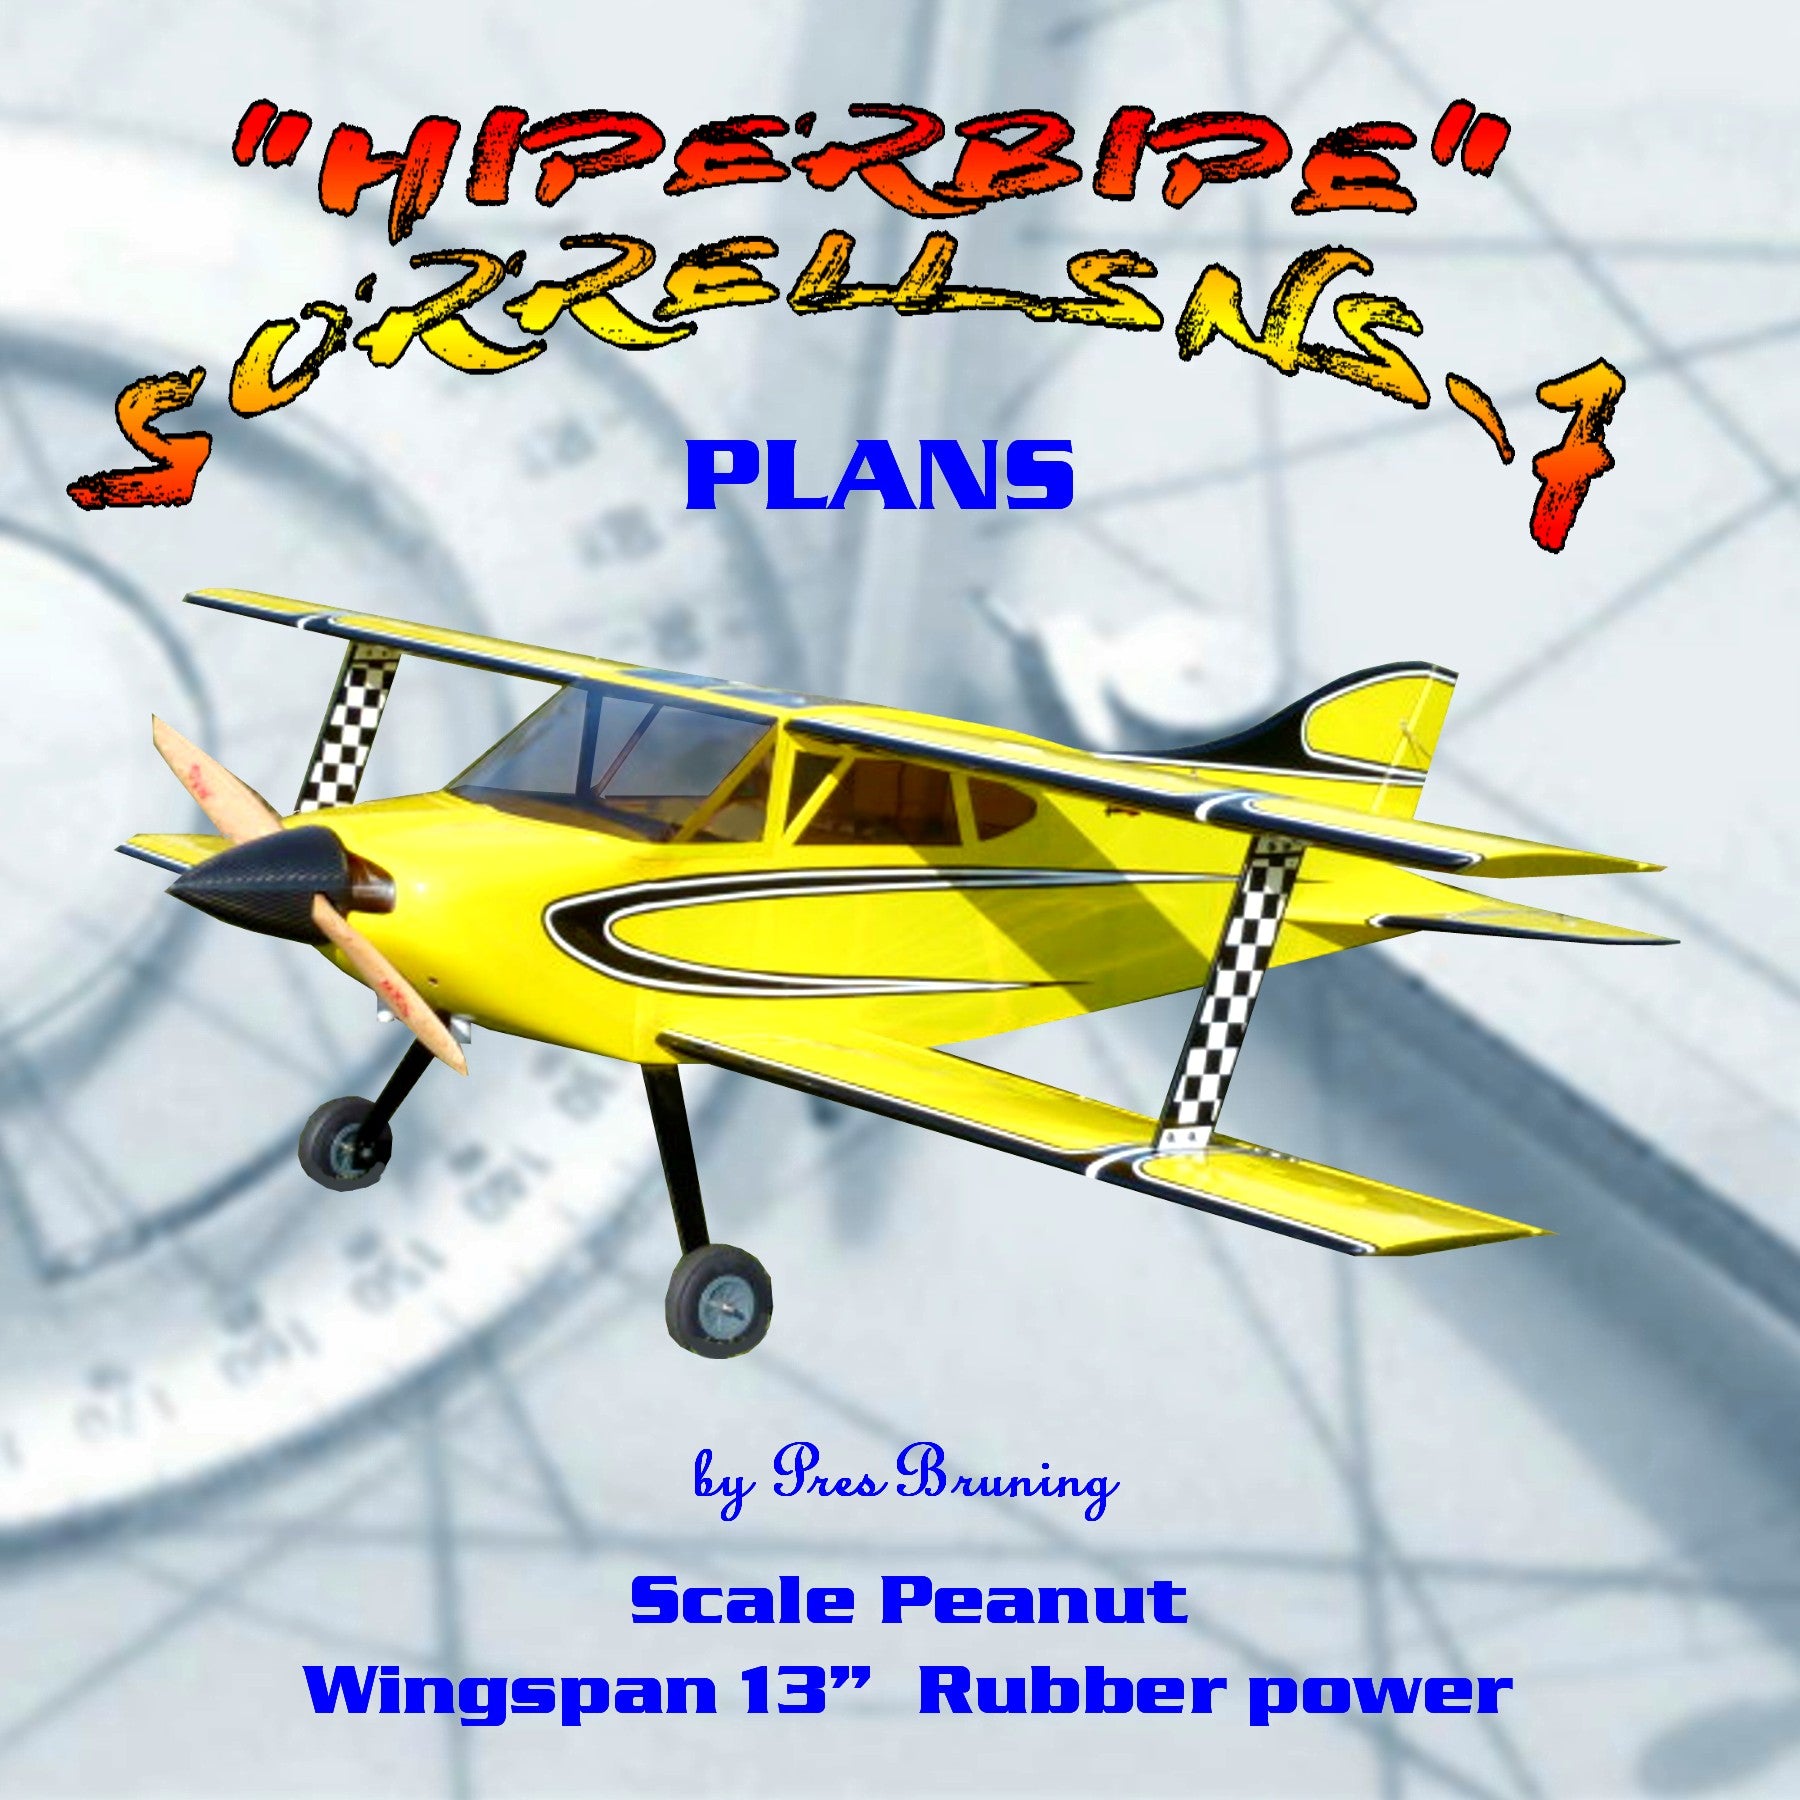 full size printed plans peanut scale “hiperbipe”  sorrell sns-7 most eye-catching